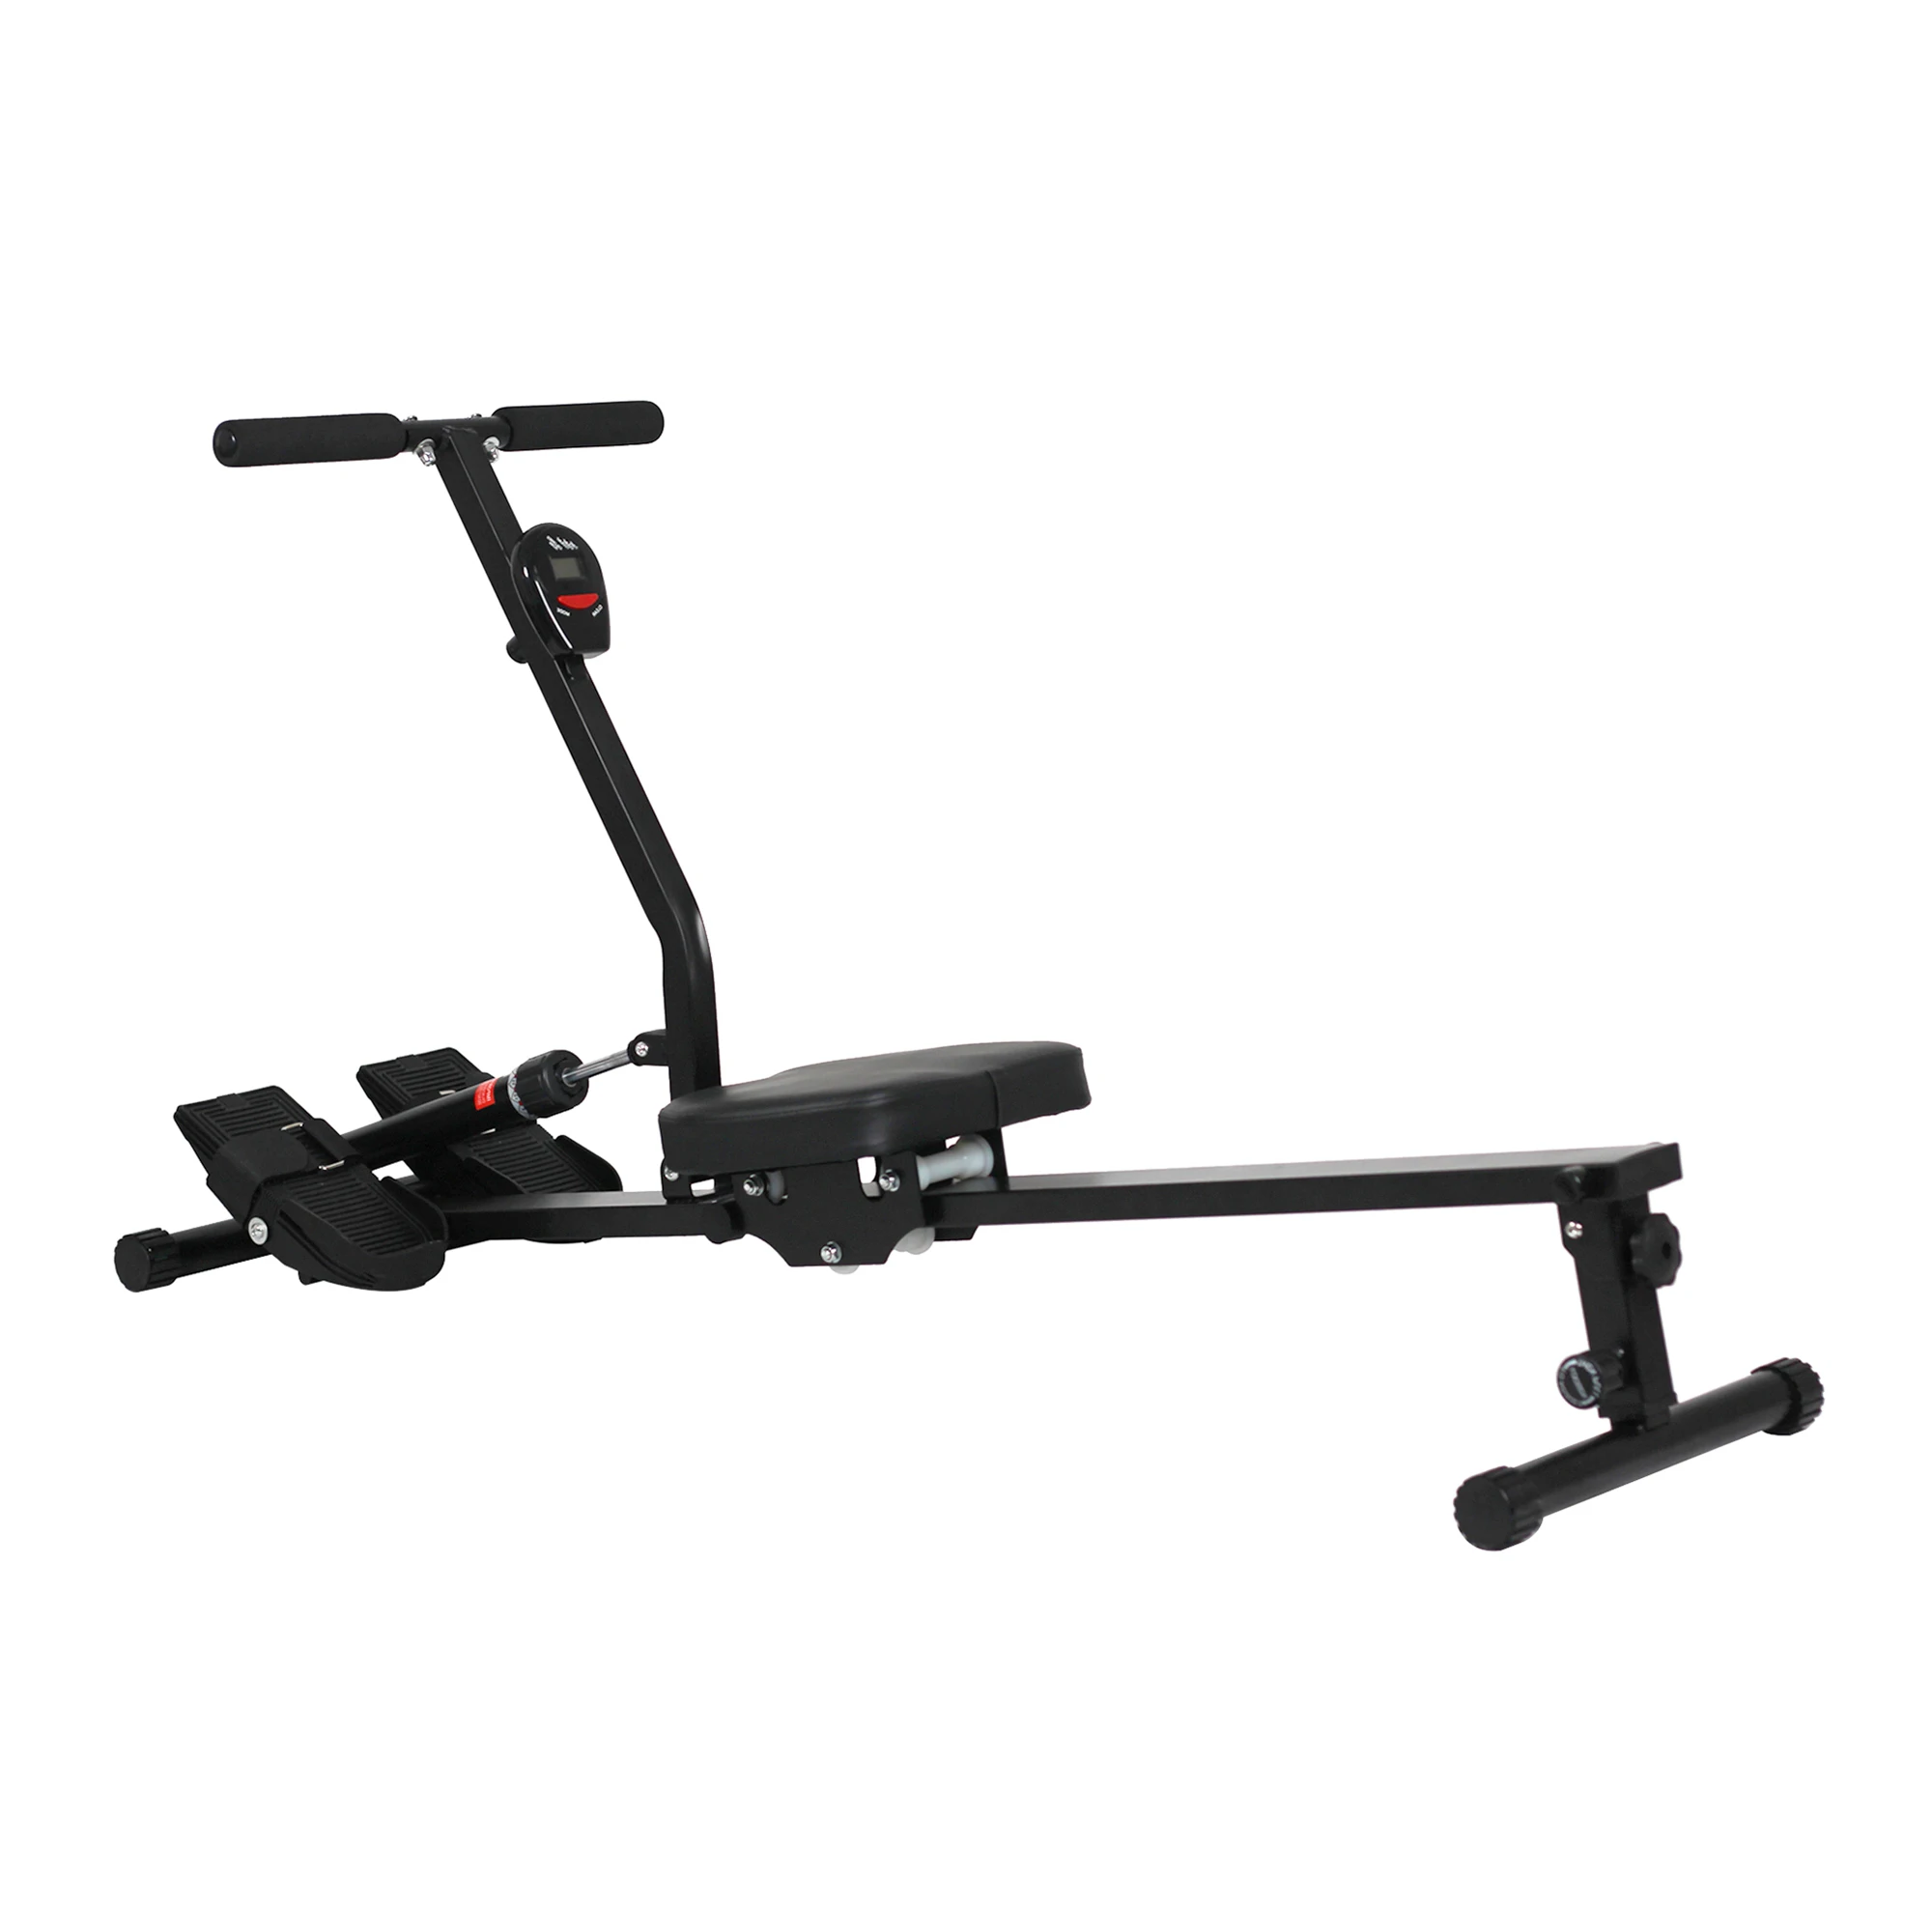 Factory Direct Good Quality Rowing Machine with 12 gears Aerobic Exercise Abdominal Exerciser